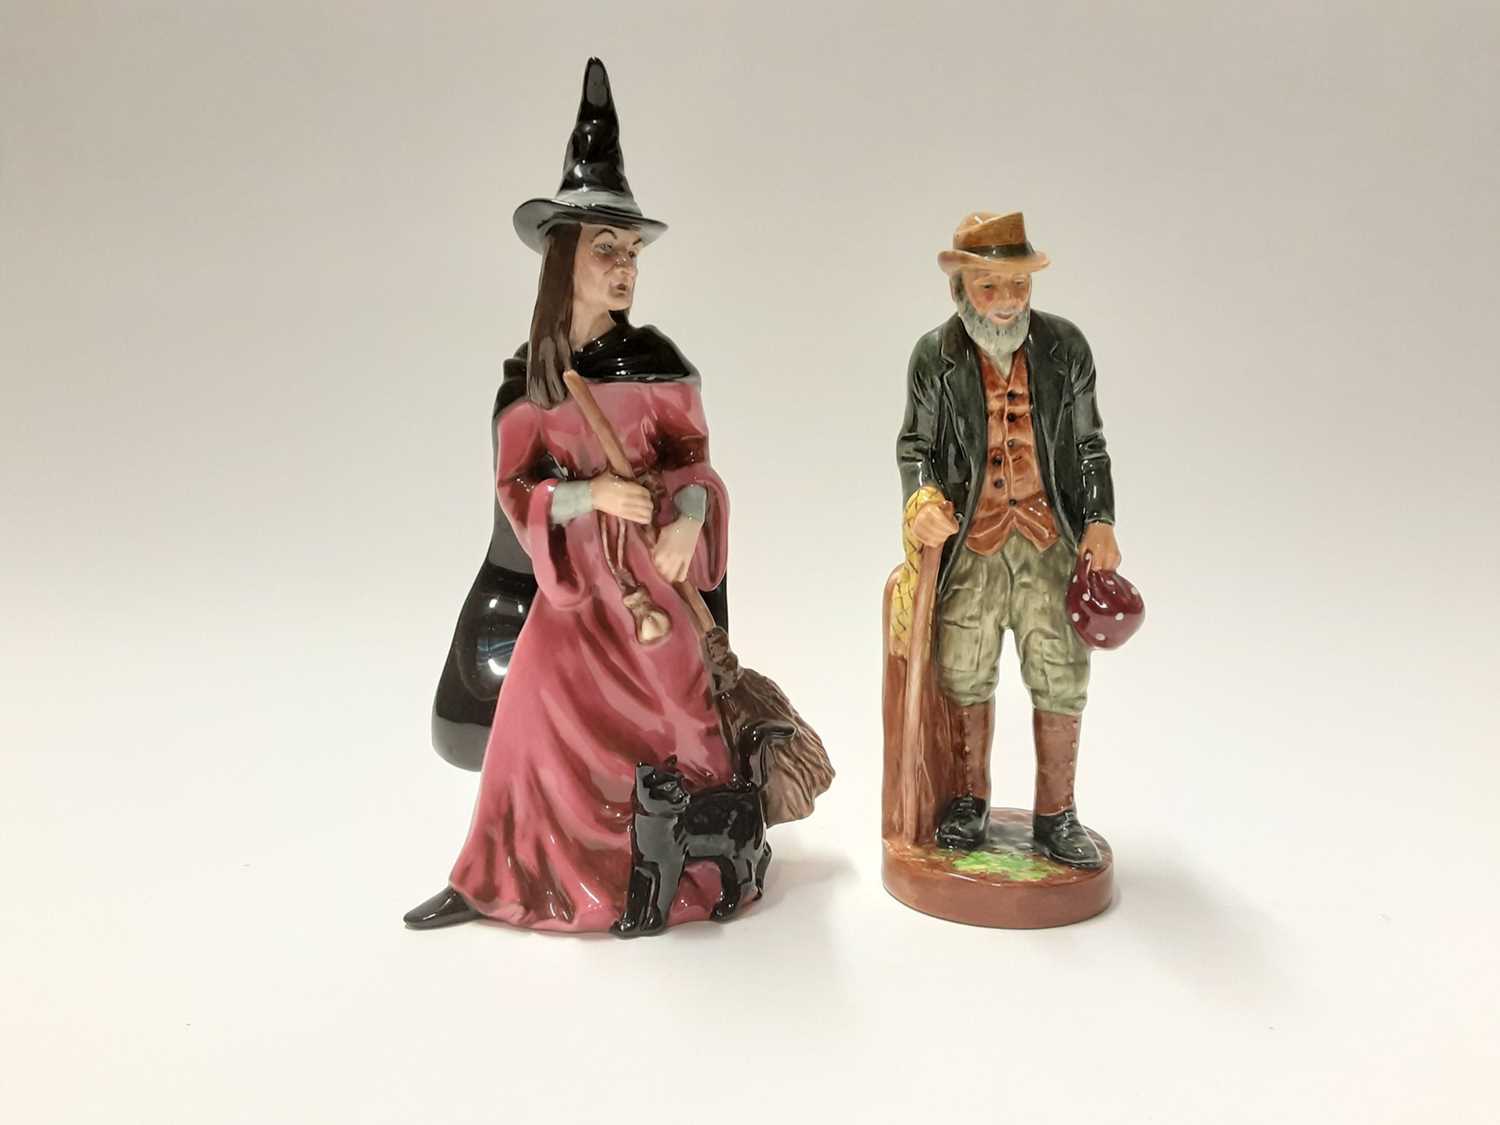 Lot 132 - Two Royal Doulton figures - Witch HN4444 and The Gaffer HN2053